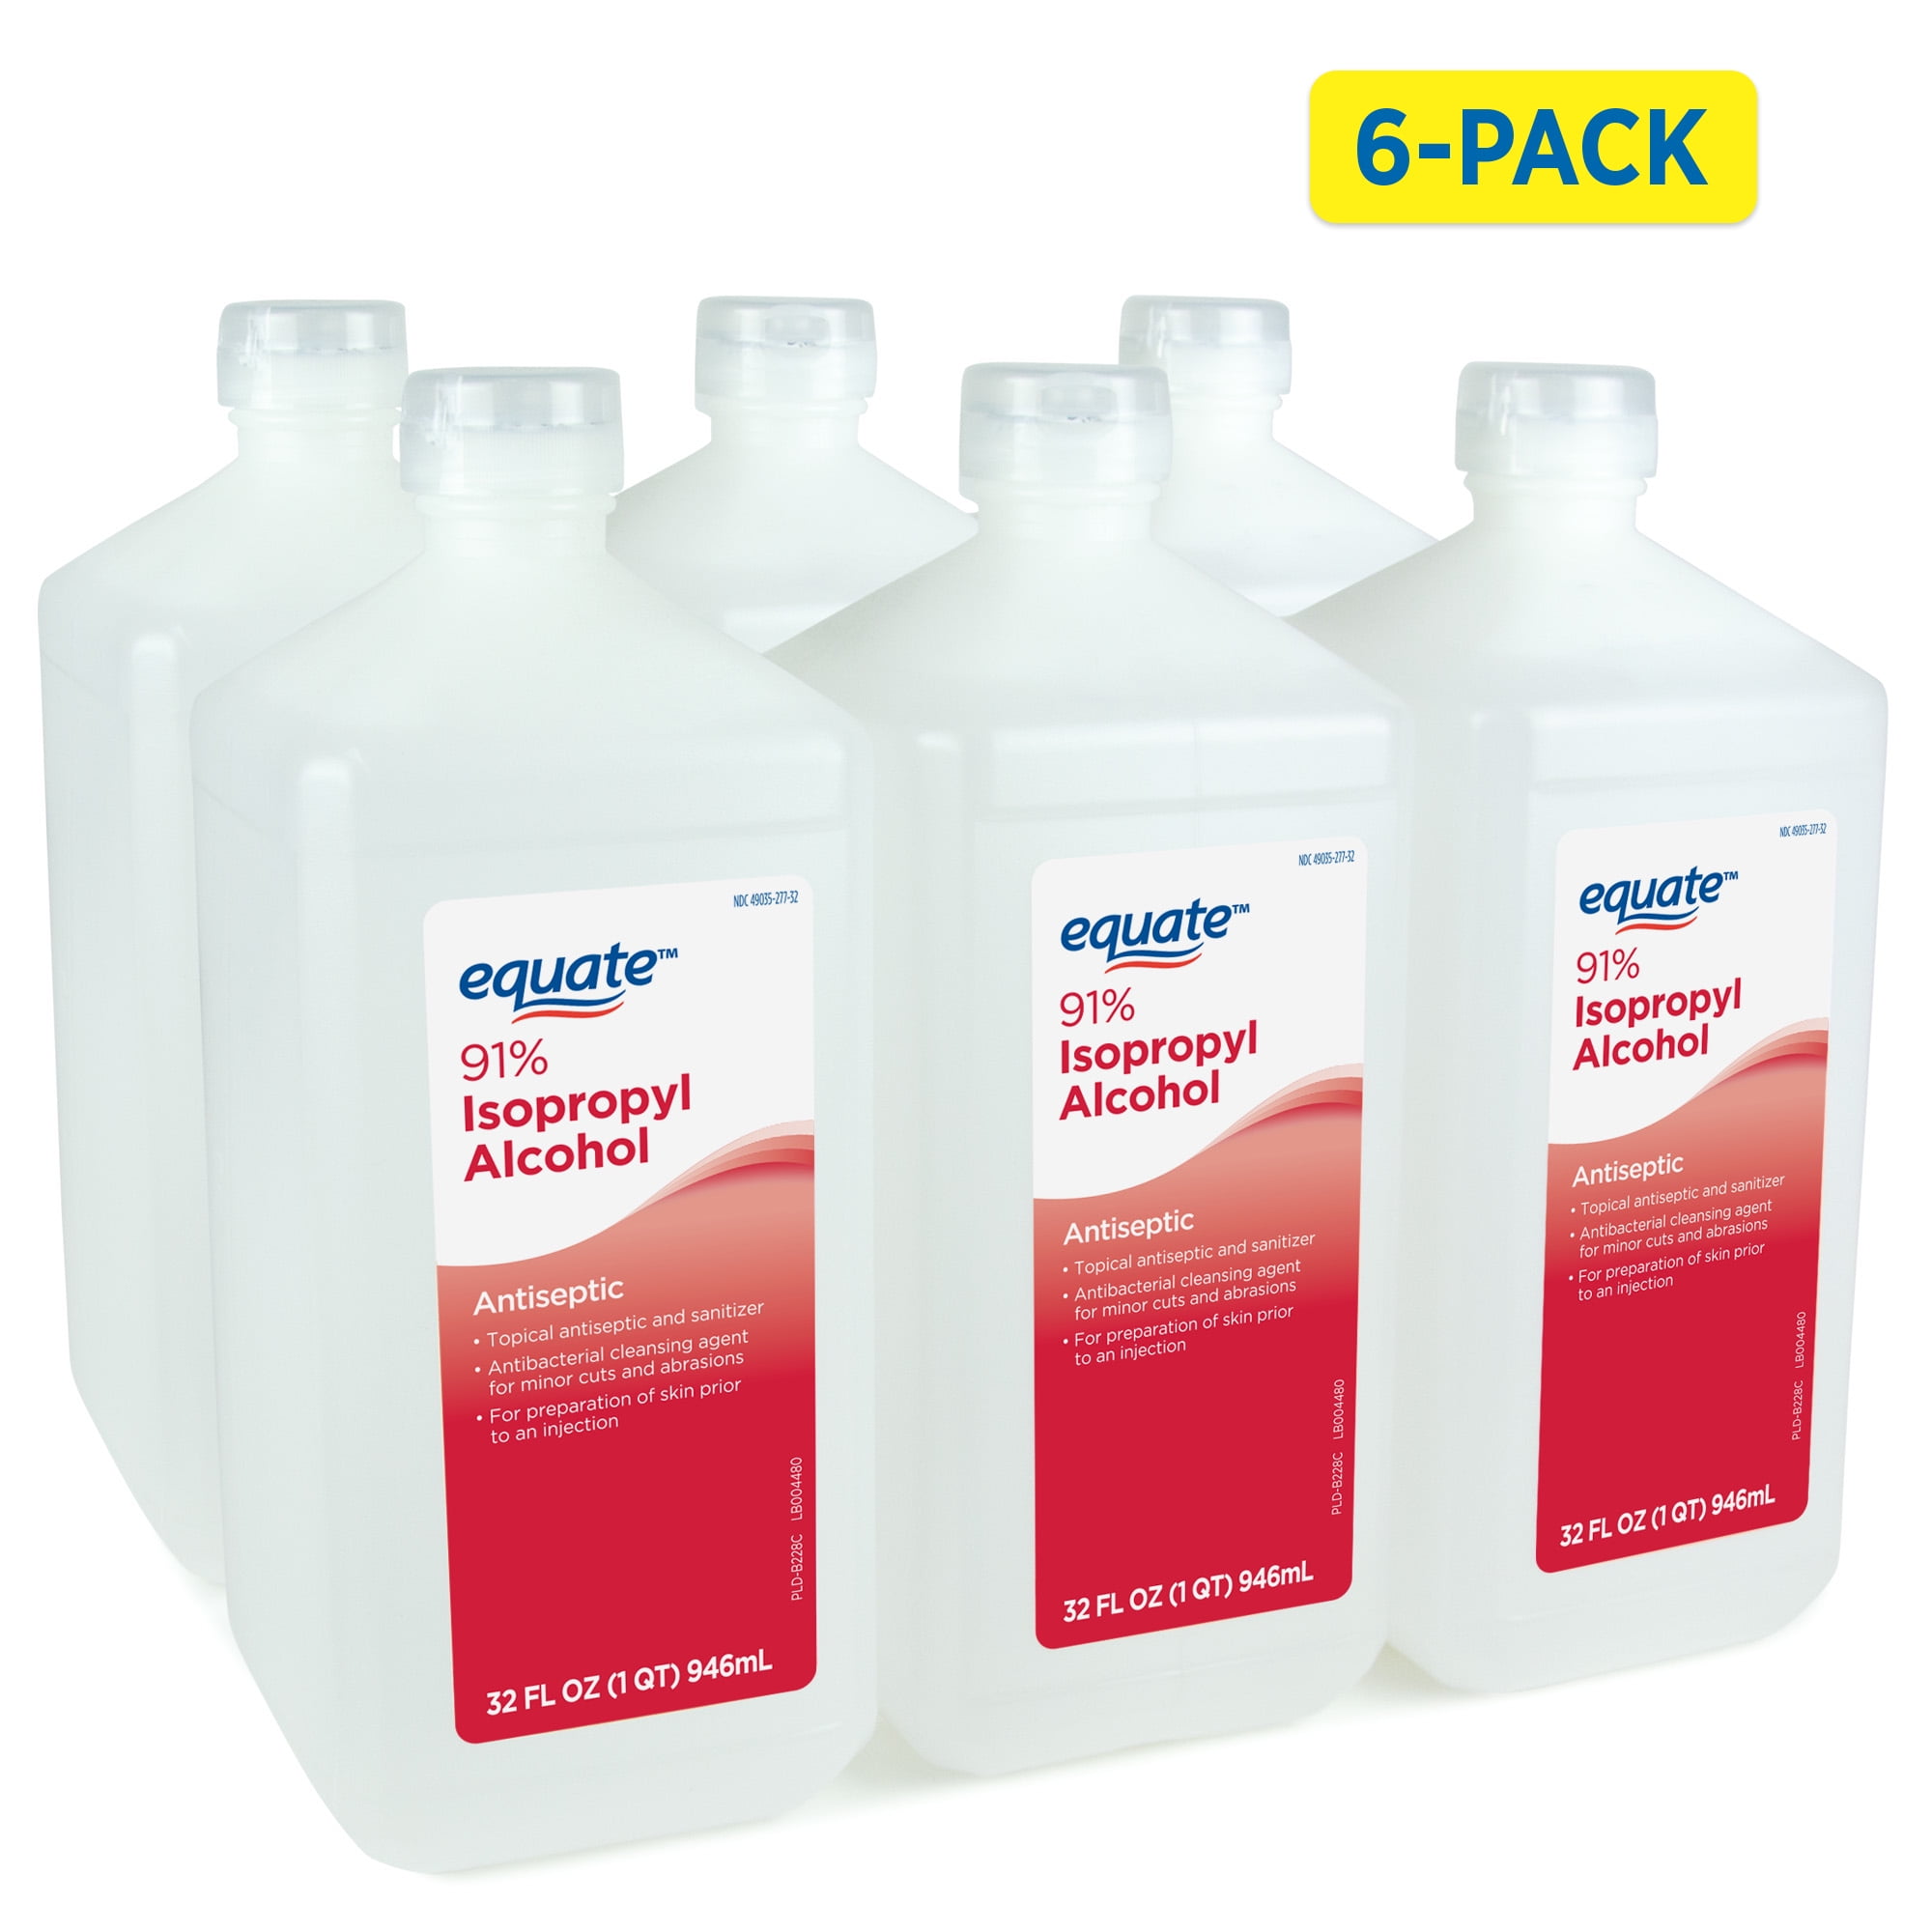 Solimo 91% Isopropyl Alcohol Antiseptic Spray Bottle For $4.20 Or 6 Pack  For $17.99 From  